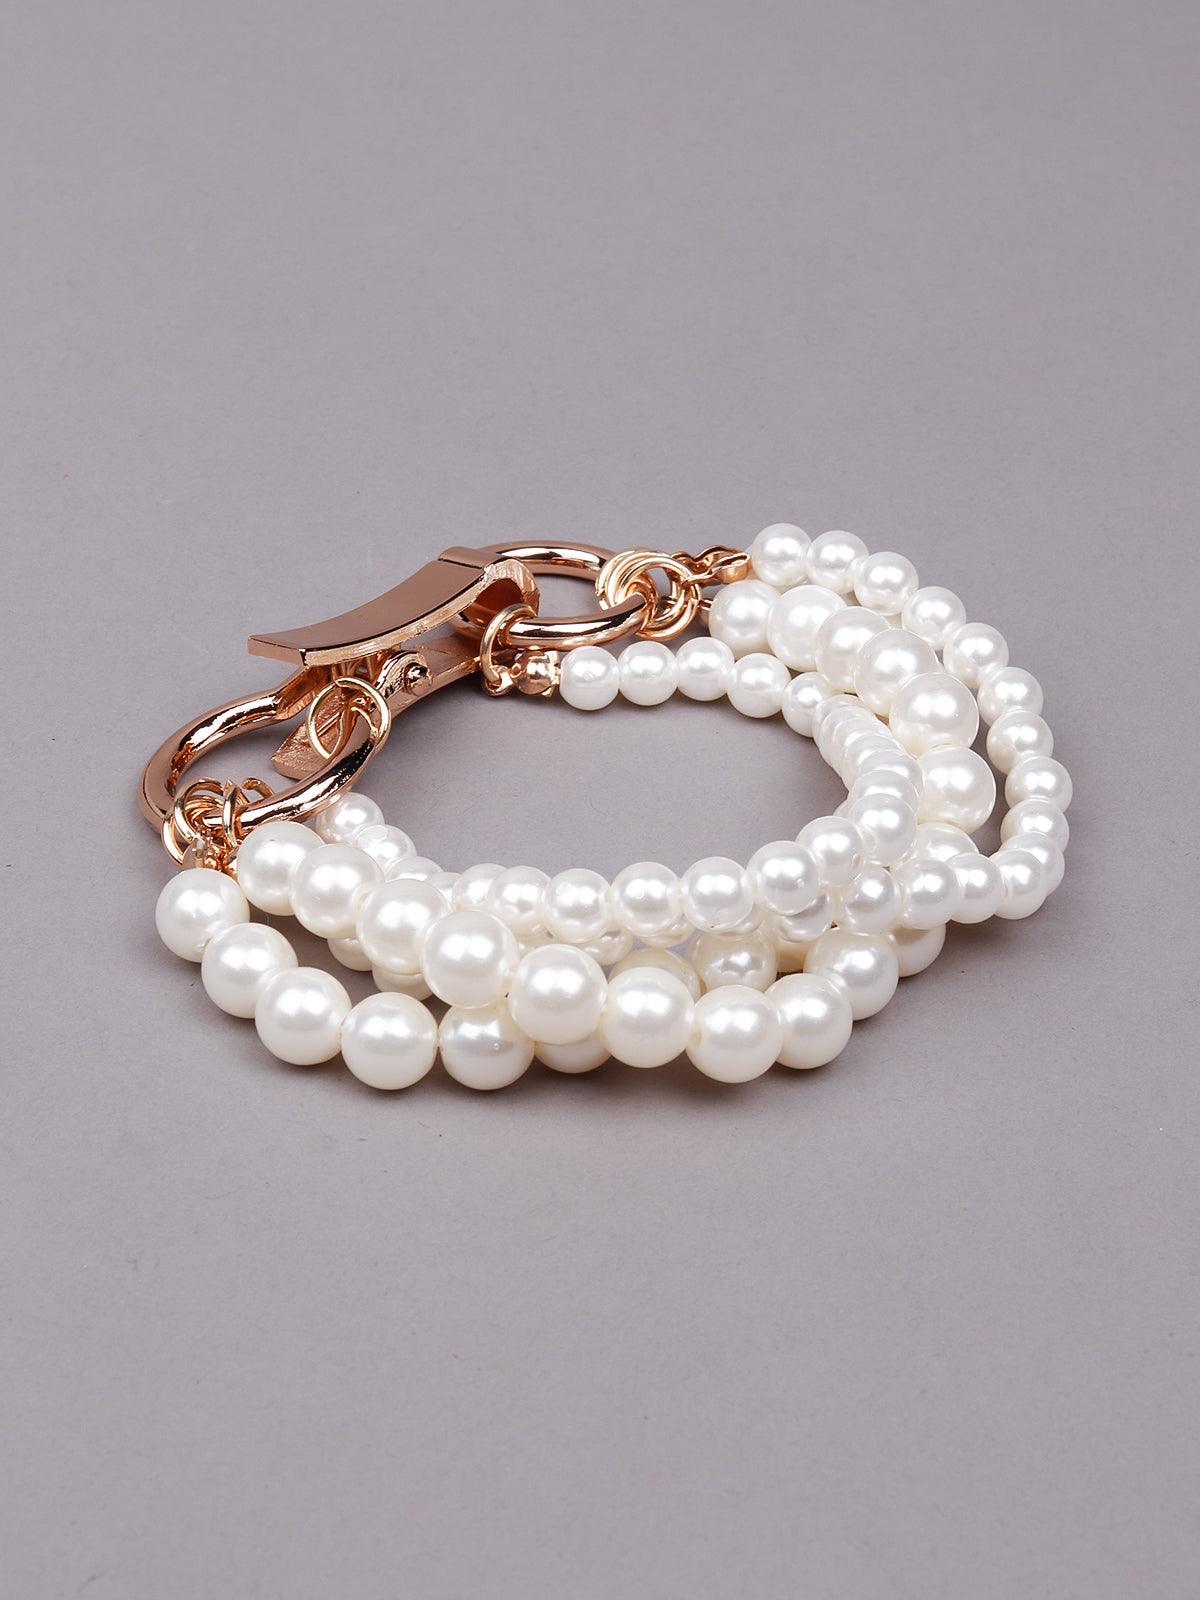 Layered exquisite pearl bracelet - Odette